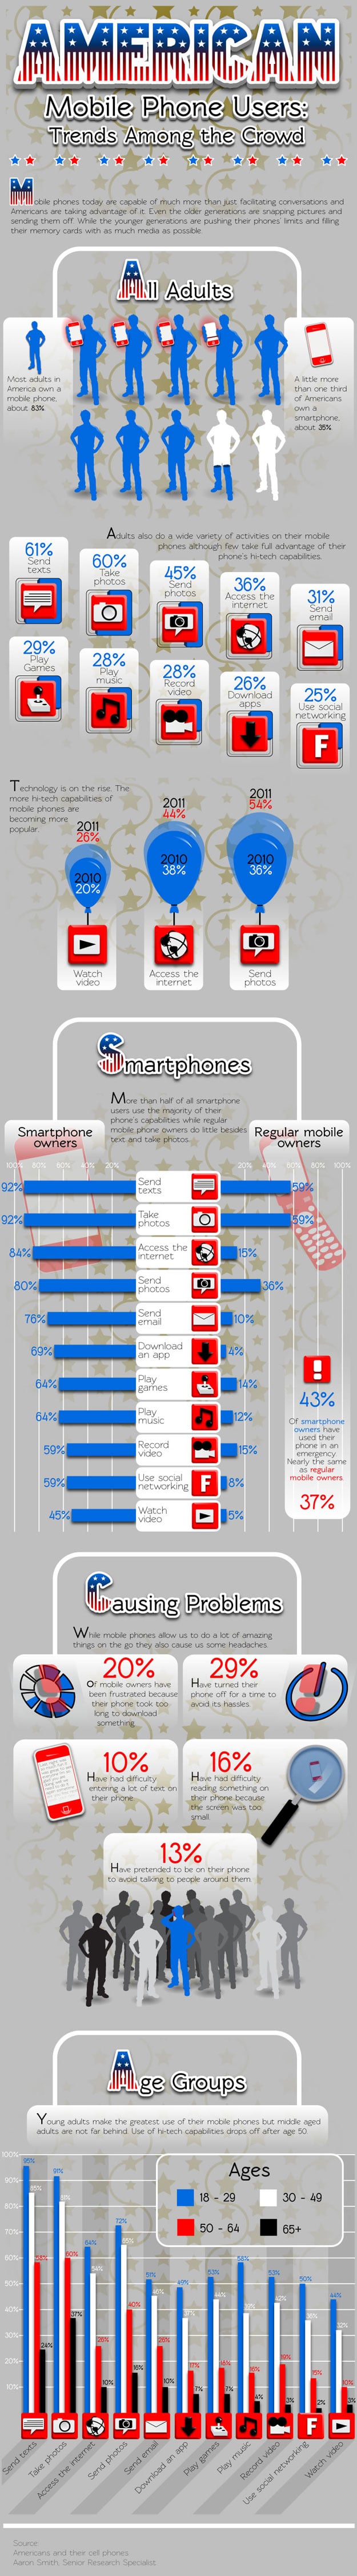 American Mobile Phone Users Infographic